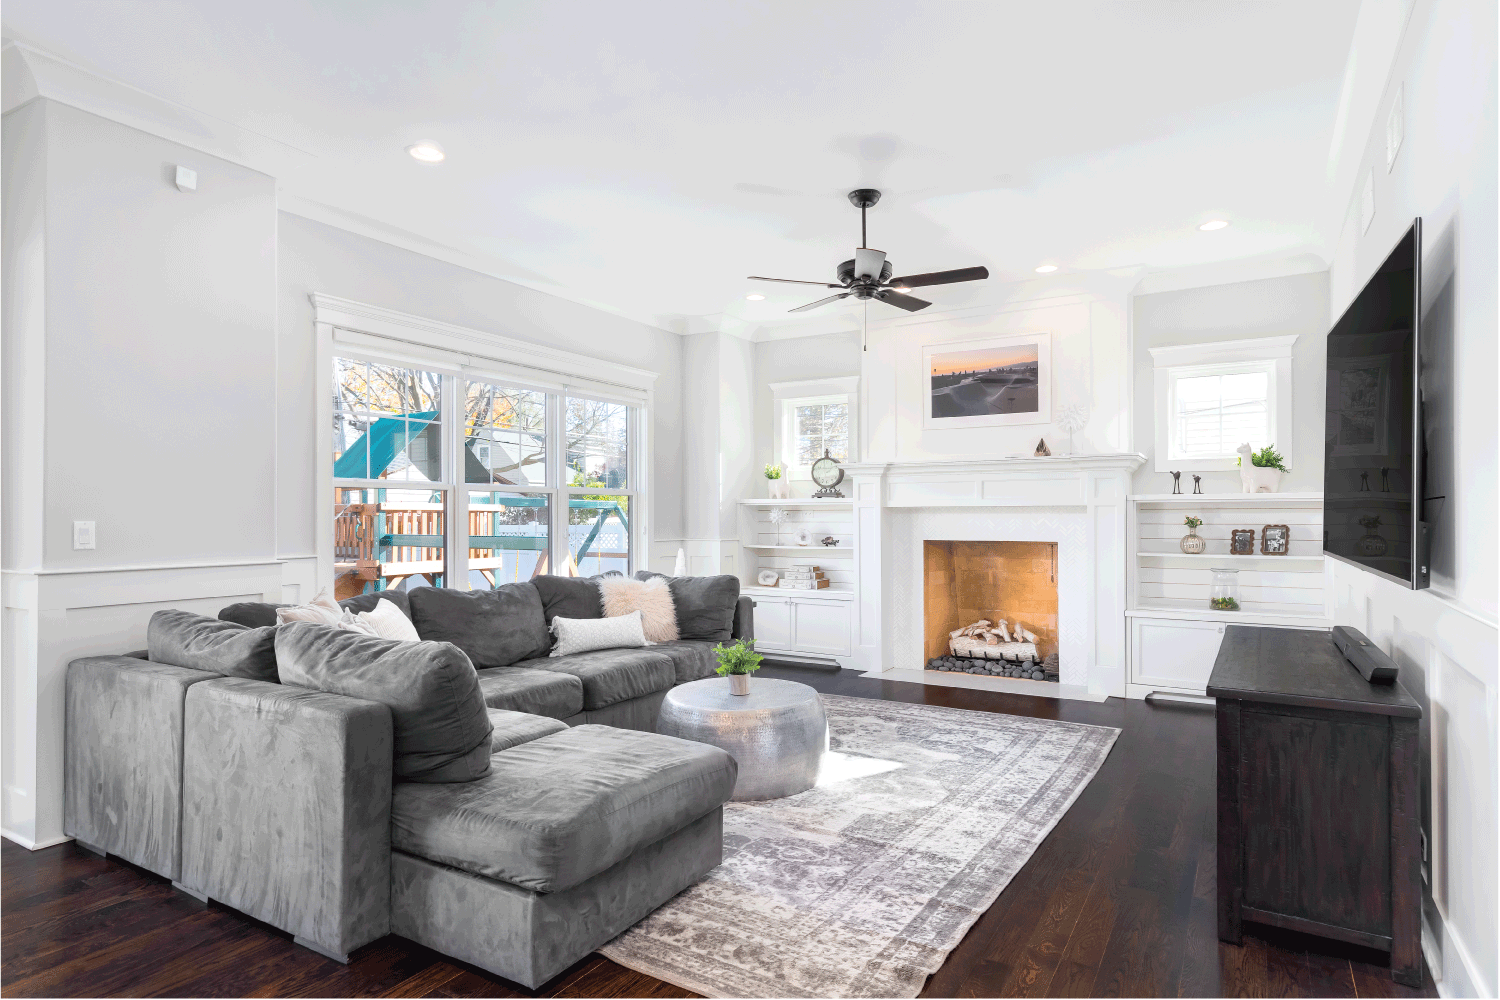 A cozy, white living room with a large grey sectional couch, an area rug on hardwood floors, and a white fireplace with built-in shelves.